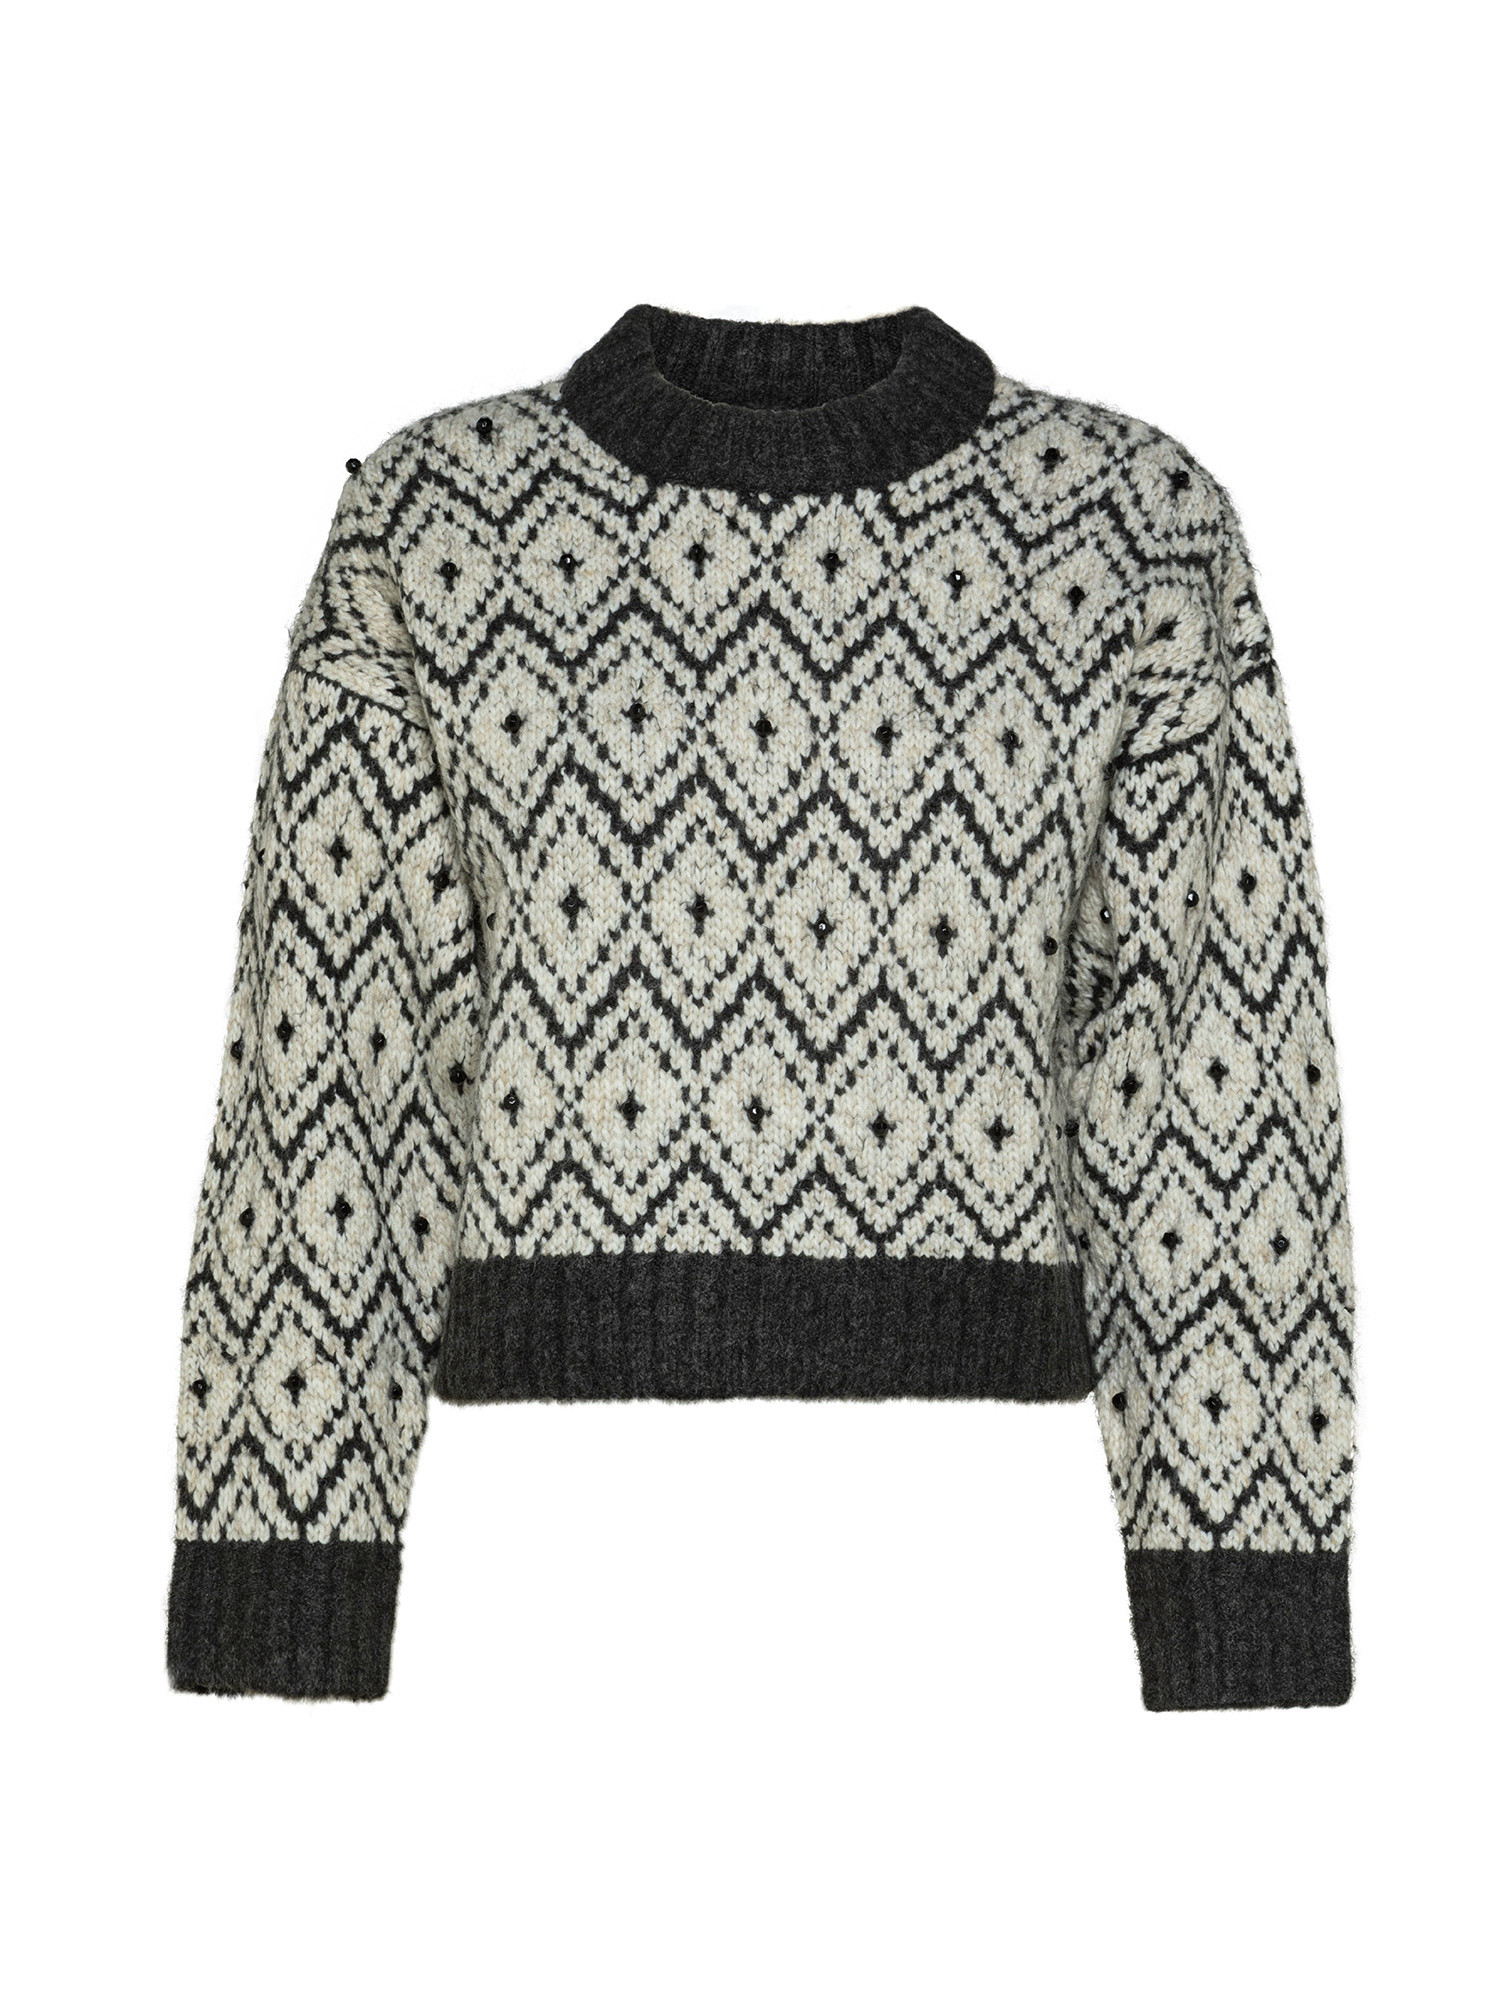 Bexa jacquard pullover, Multicolor, large image number 0